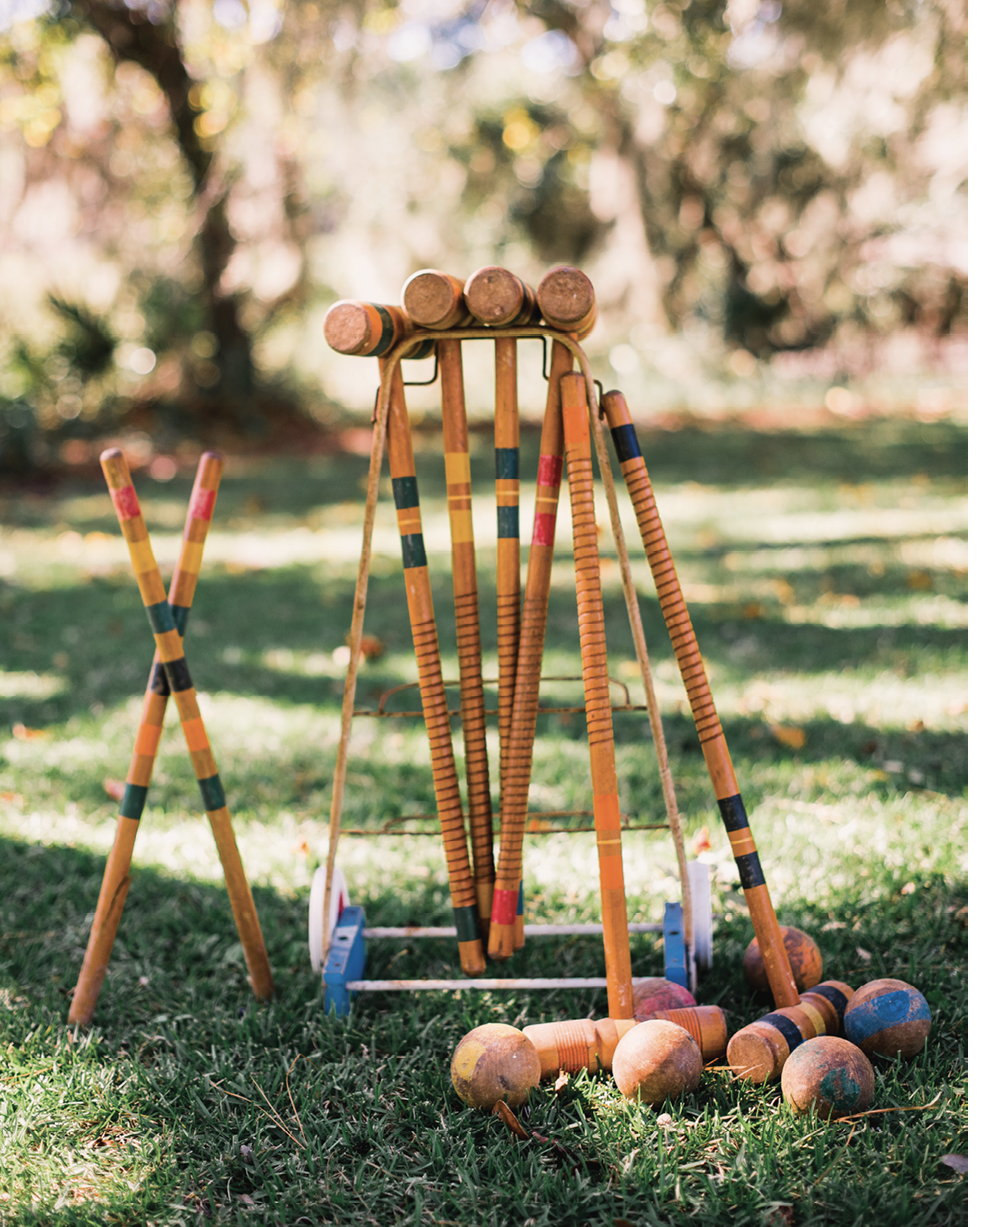 ...play croquet while staying distanced.